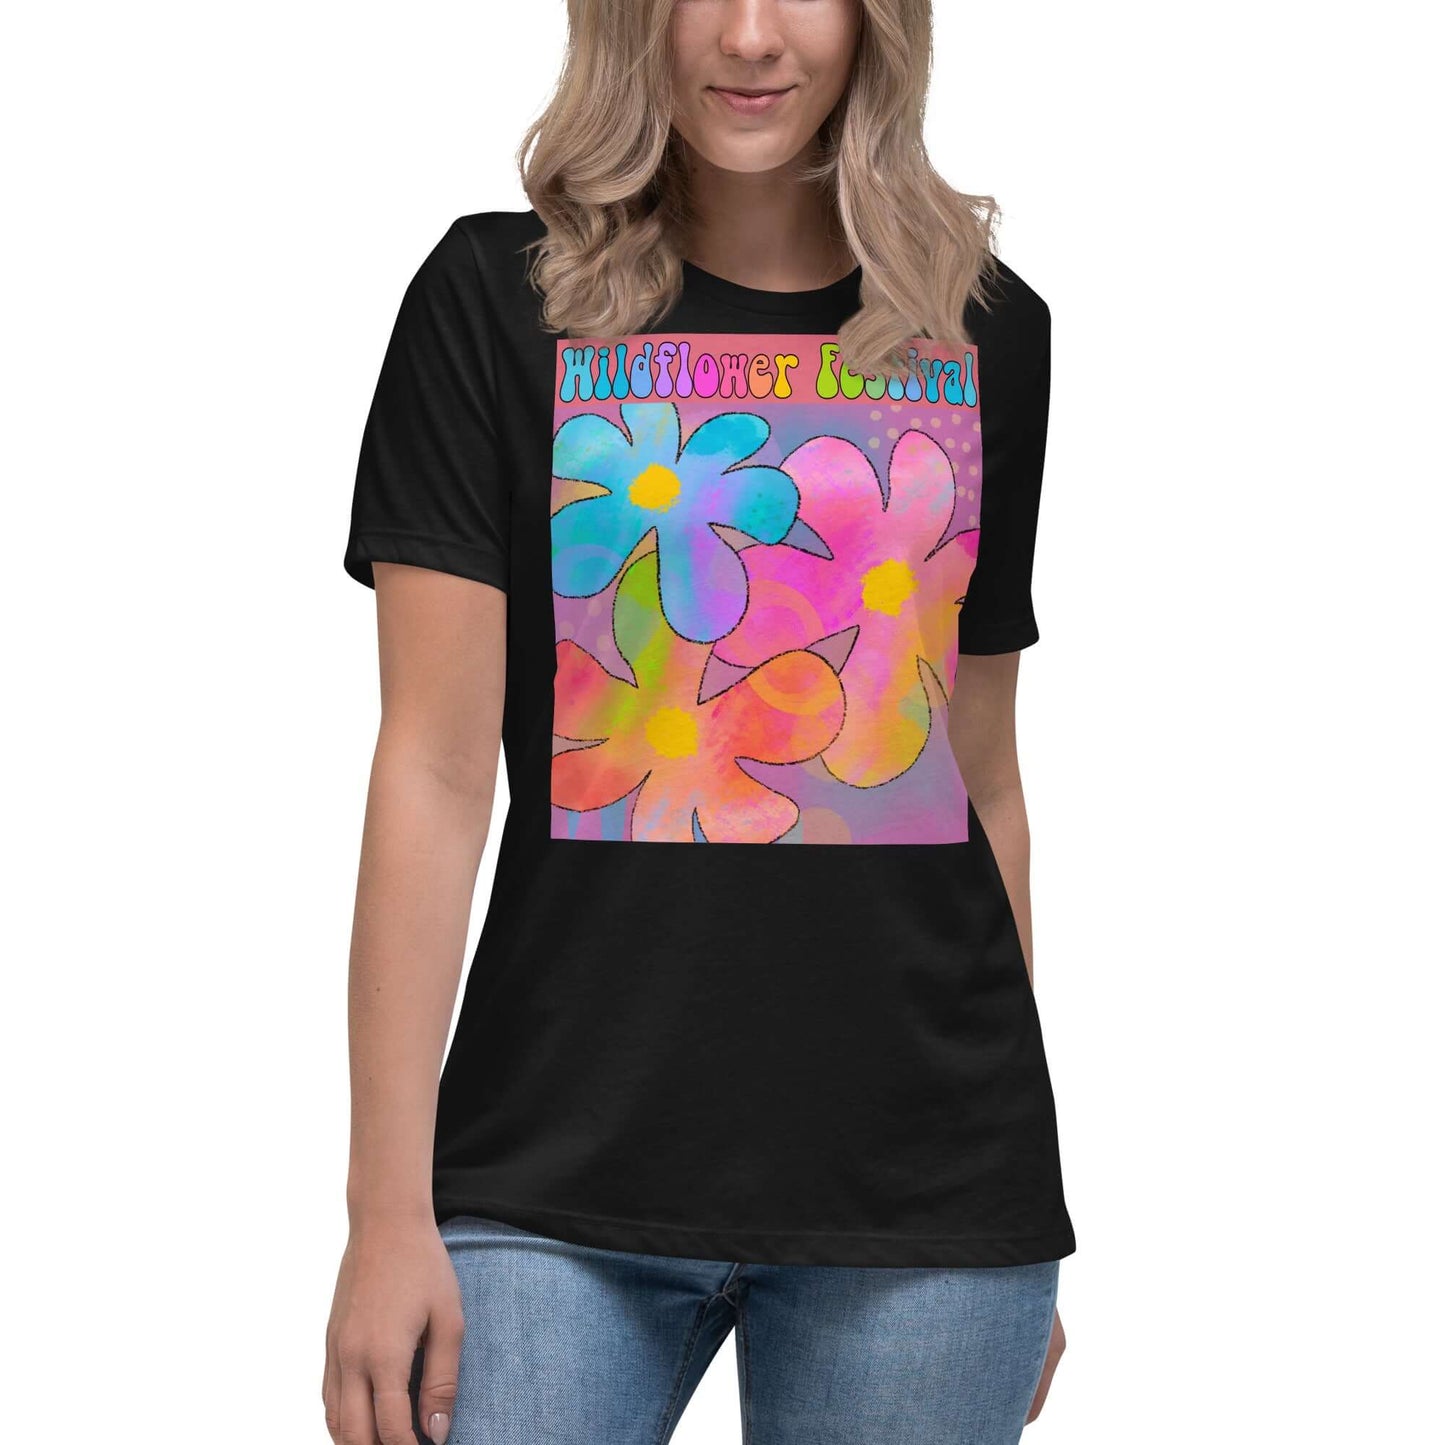 Big Colorful Hippie 1960s Psychedelic Flowers with Text “Wildflower Festival” Women’s Short Sleeve Tee in Black